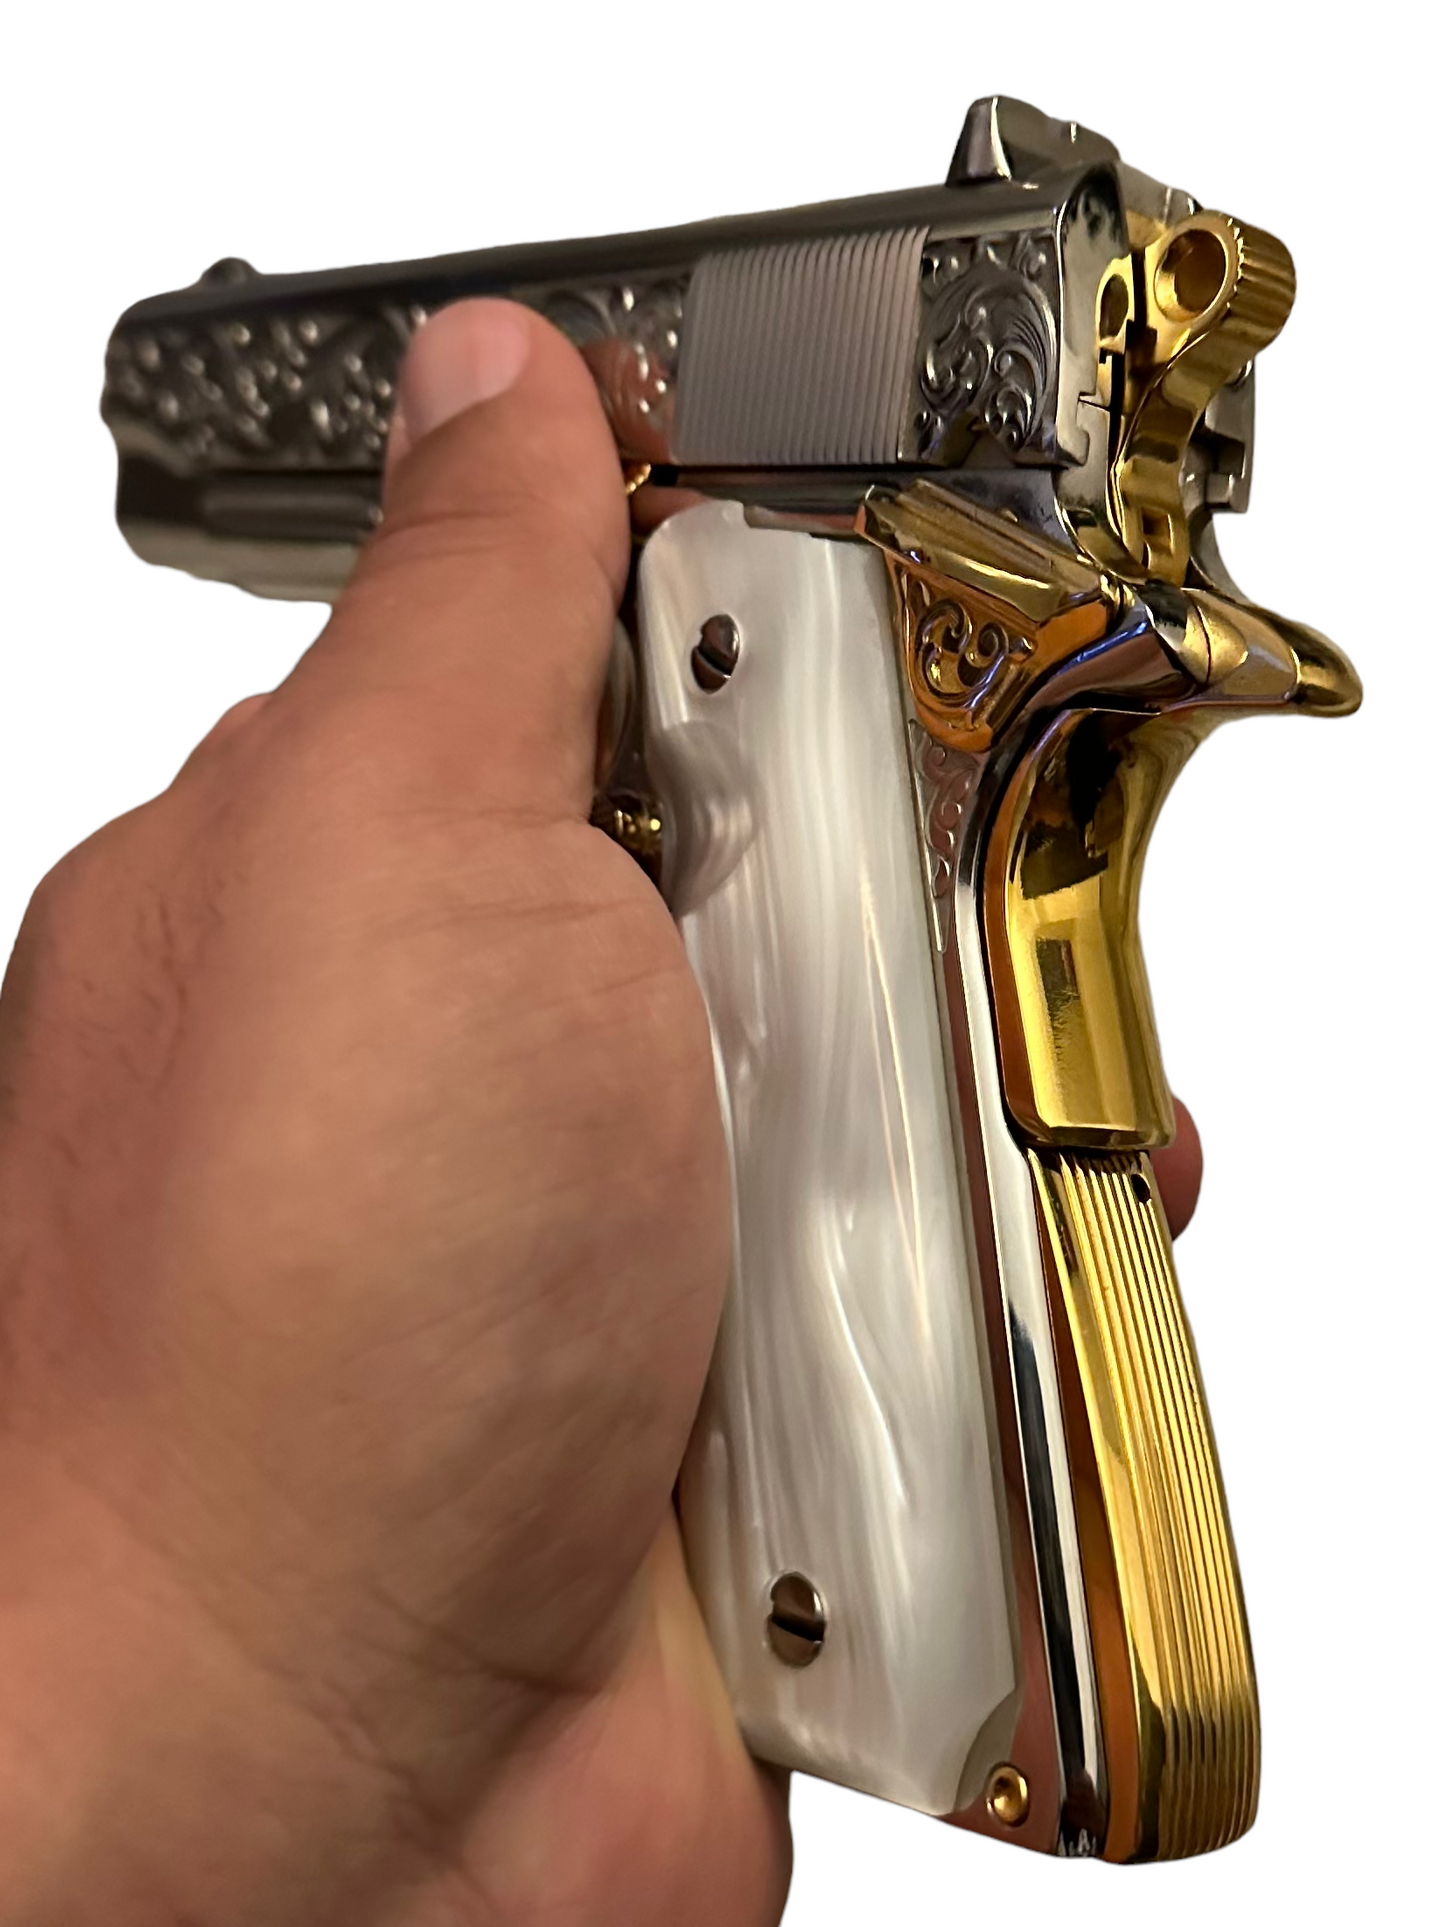 TISAS TANK COMMANDER 9mm 1911A1 TC 9 FULLY ENGRAVED, HIGH POLISHED, NICKEL & 24K GOLD PLATED